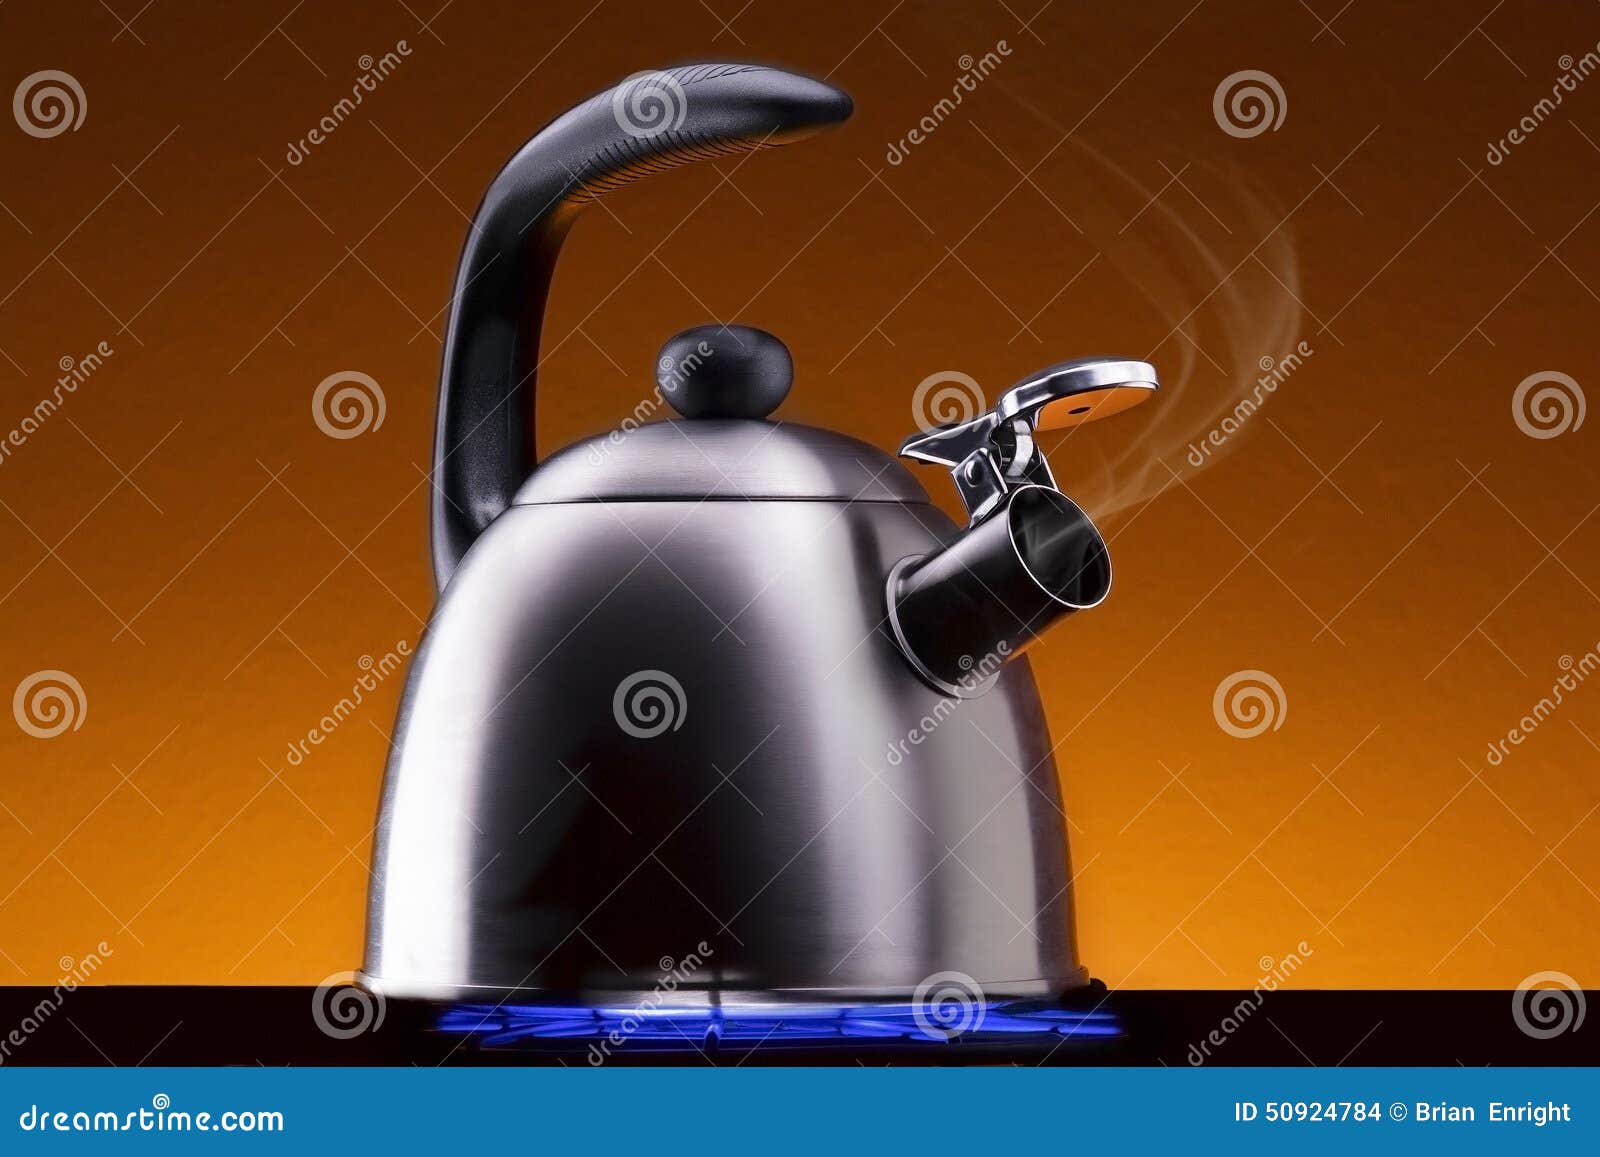 Tea Kettle Steam Stock Photos and Images - 123RF